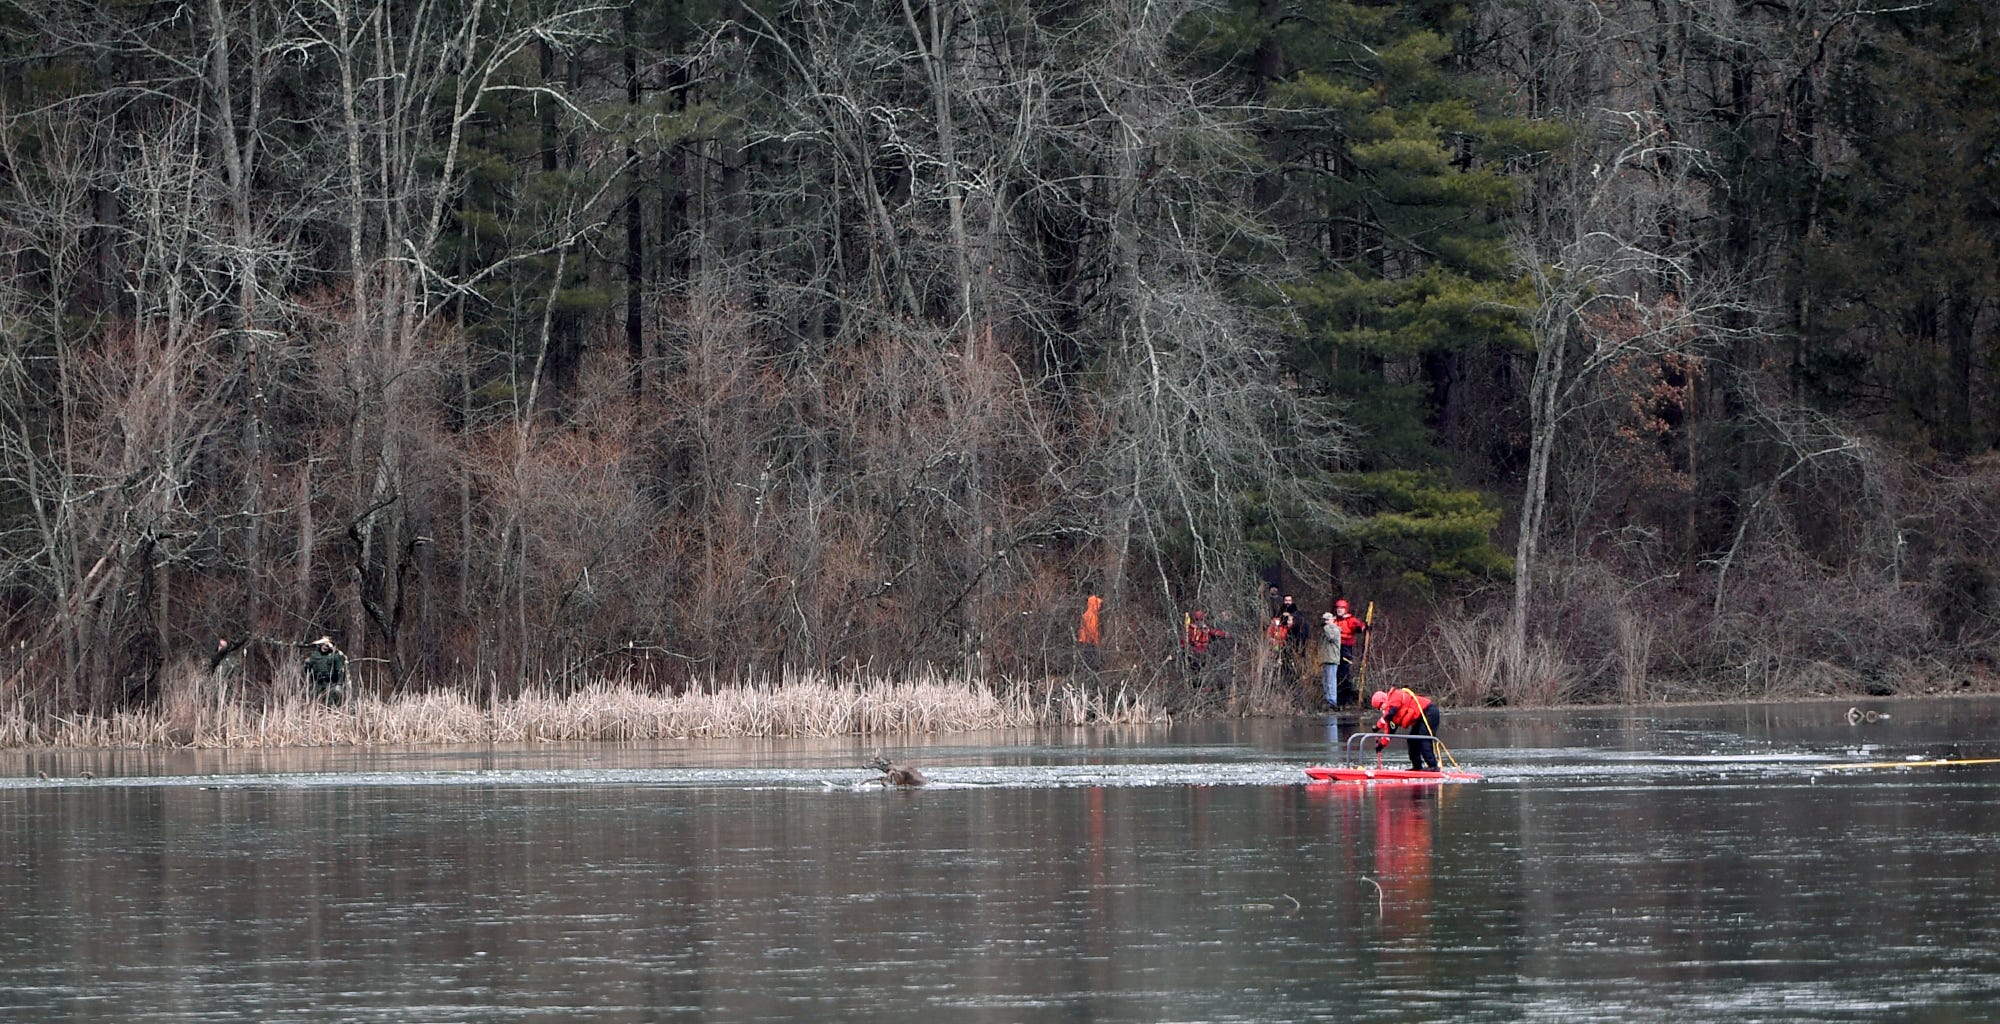 Rescue personnel and park officials attempt to rescue several deer that fell through the ice at Gifford Pinchot State Park, Saturday, January 11, 2019.
John A. Pavoncello photo